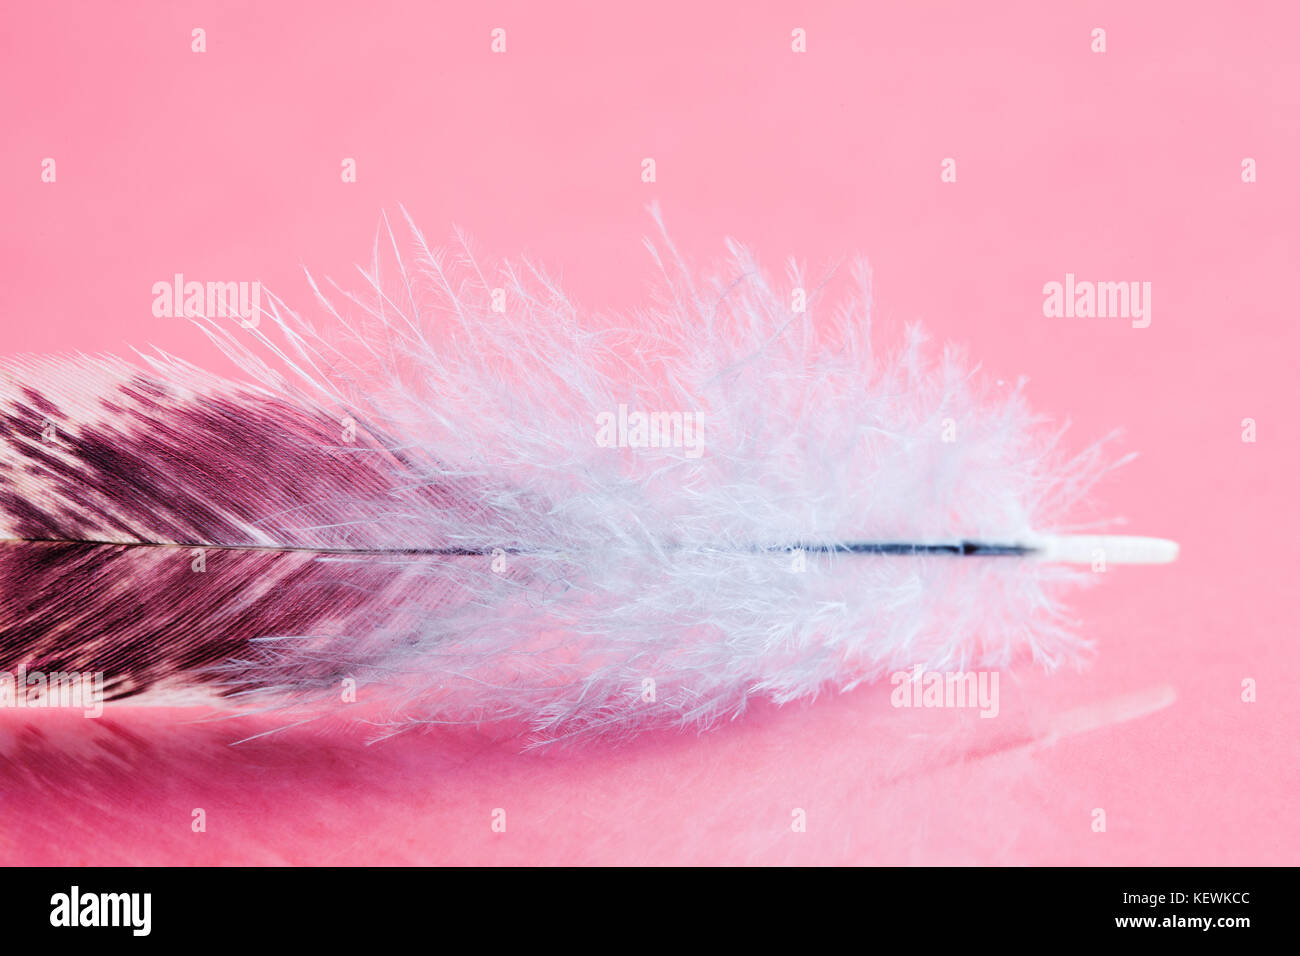 Fluffy colorful feather on pink background. Beautiful bird plumage pattern. Shallow depth of field selective focus. Stock Photo